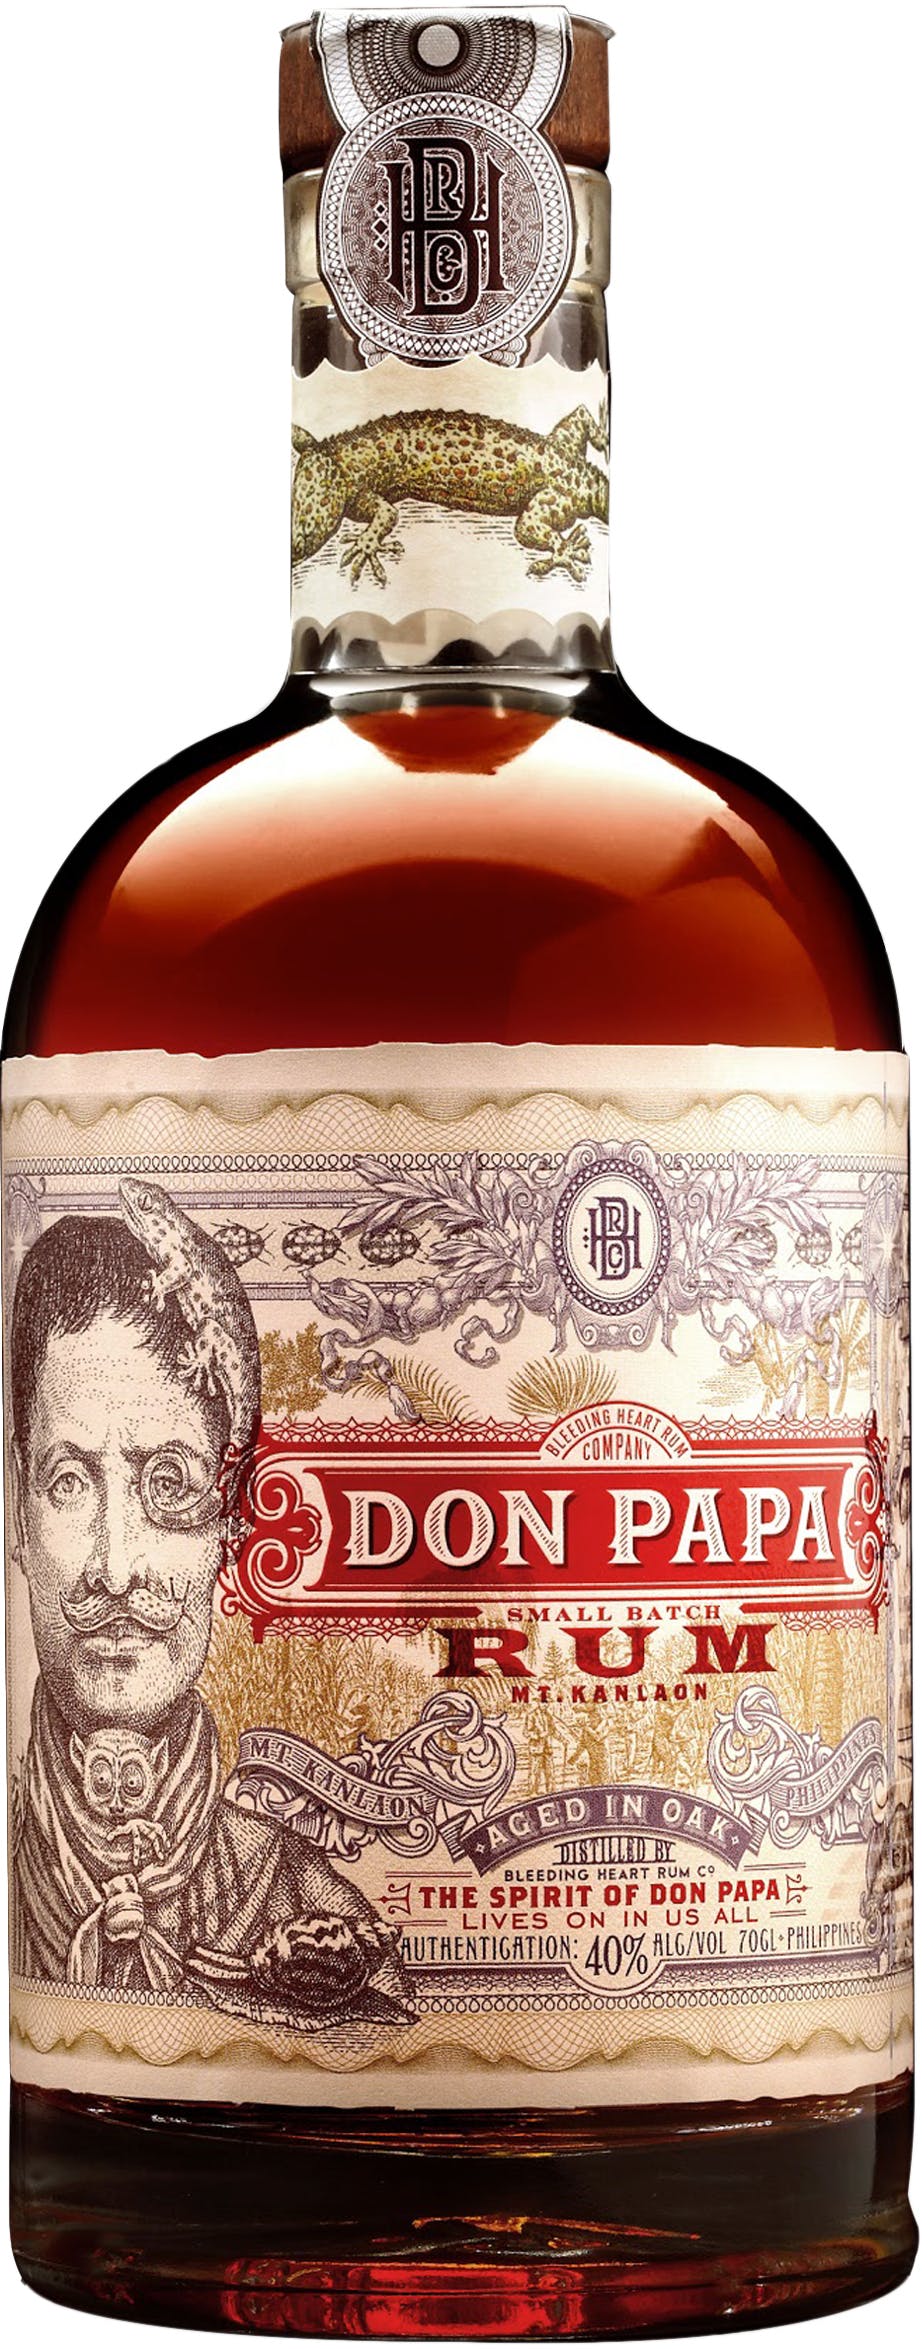 Don Papa, The Small-Batch Philippine Rum, Is Finally Available in America